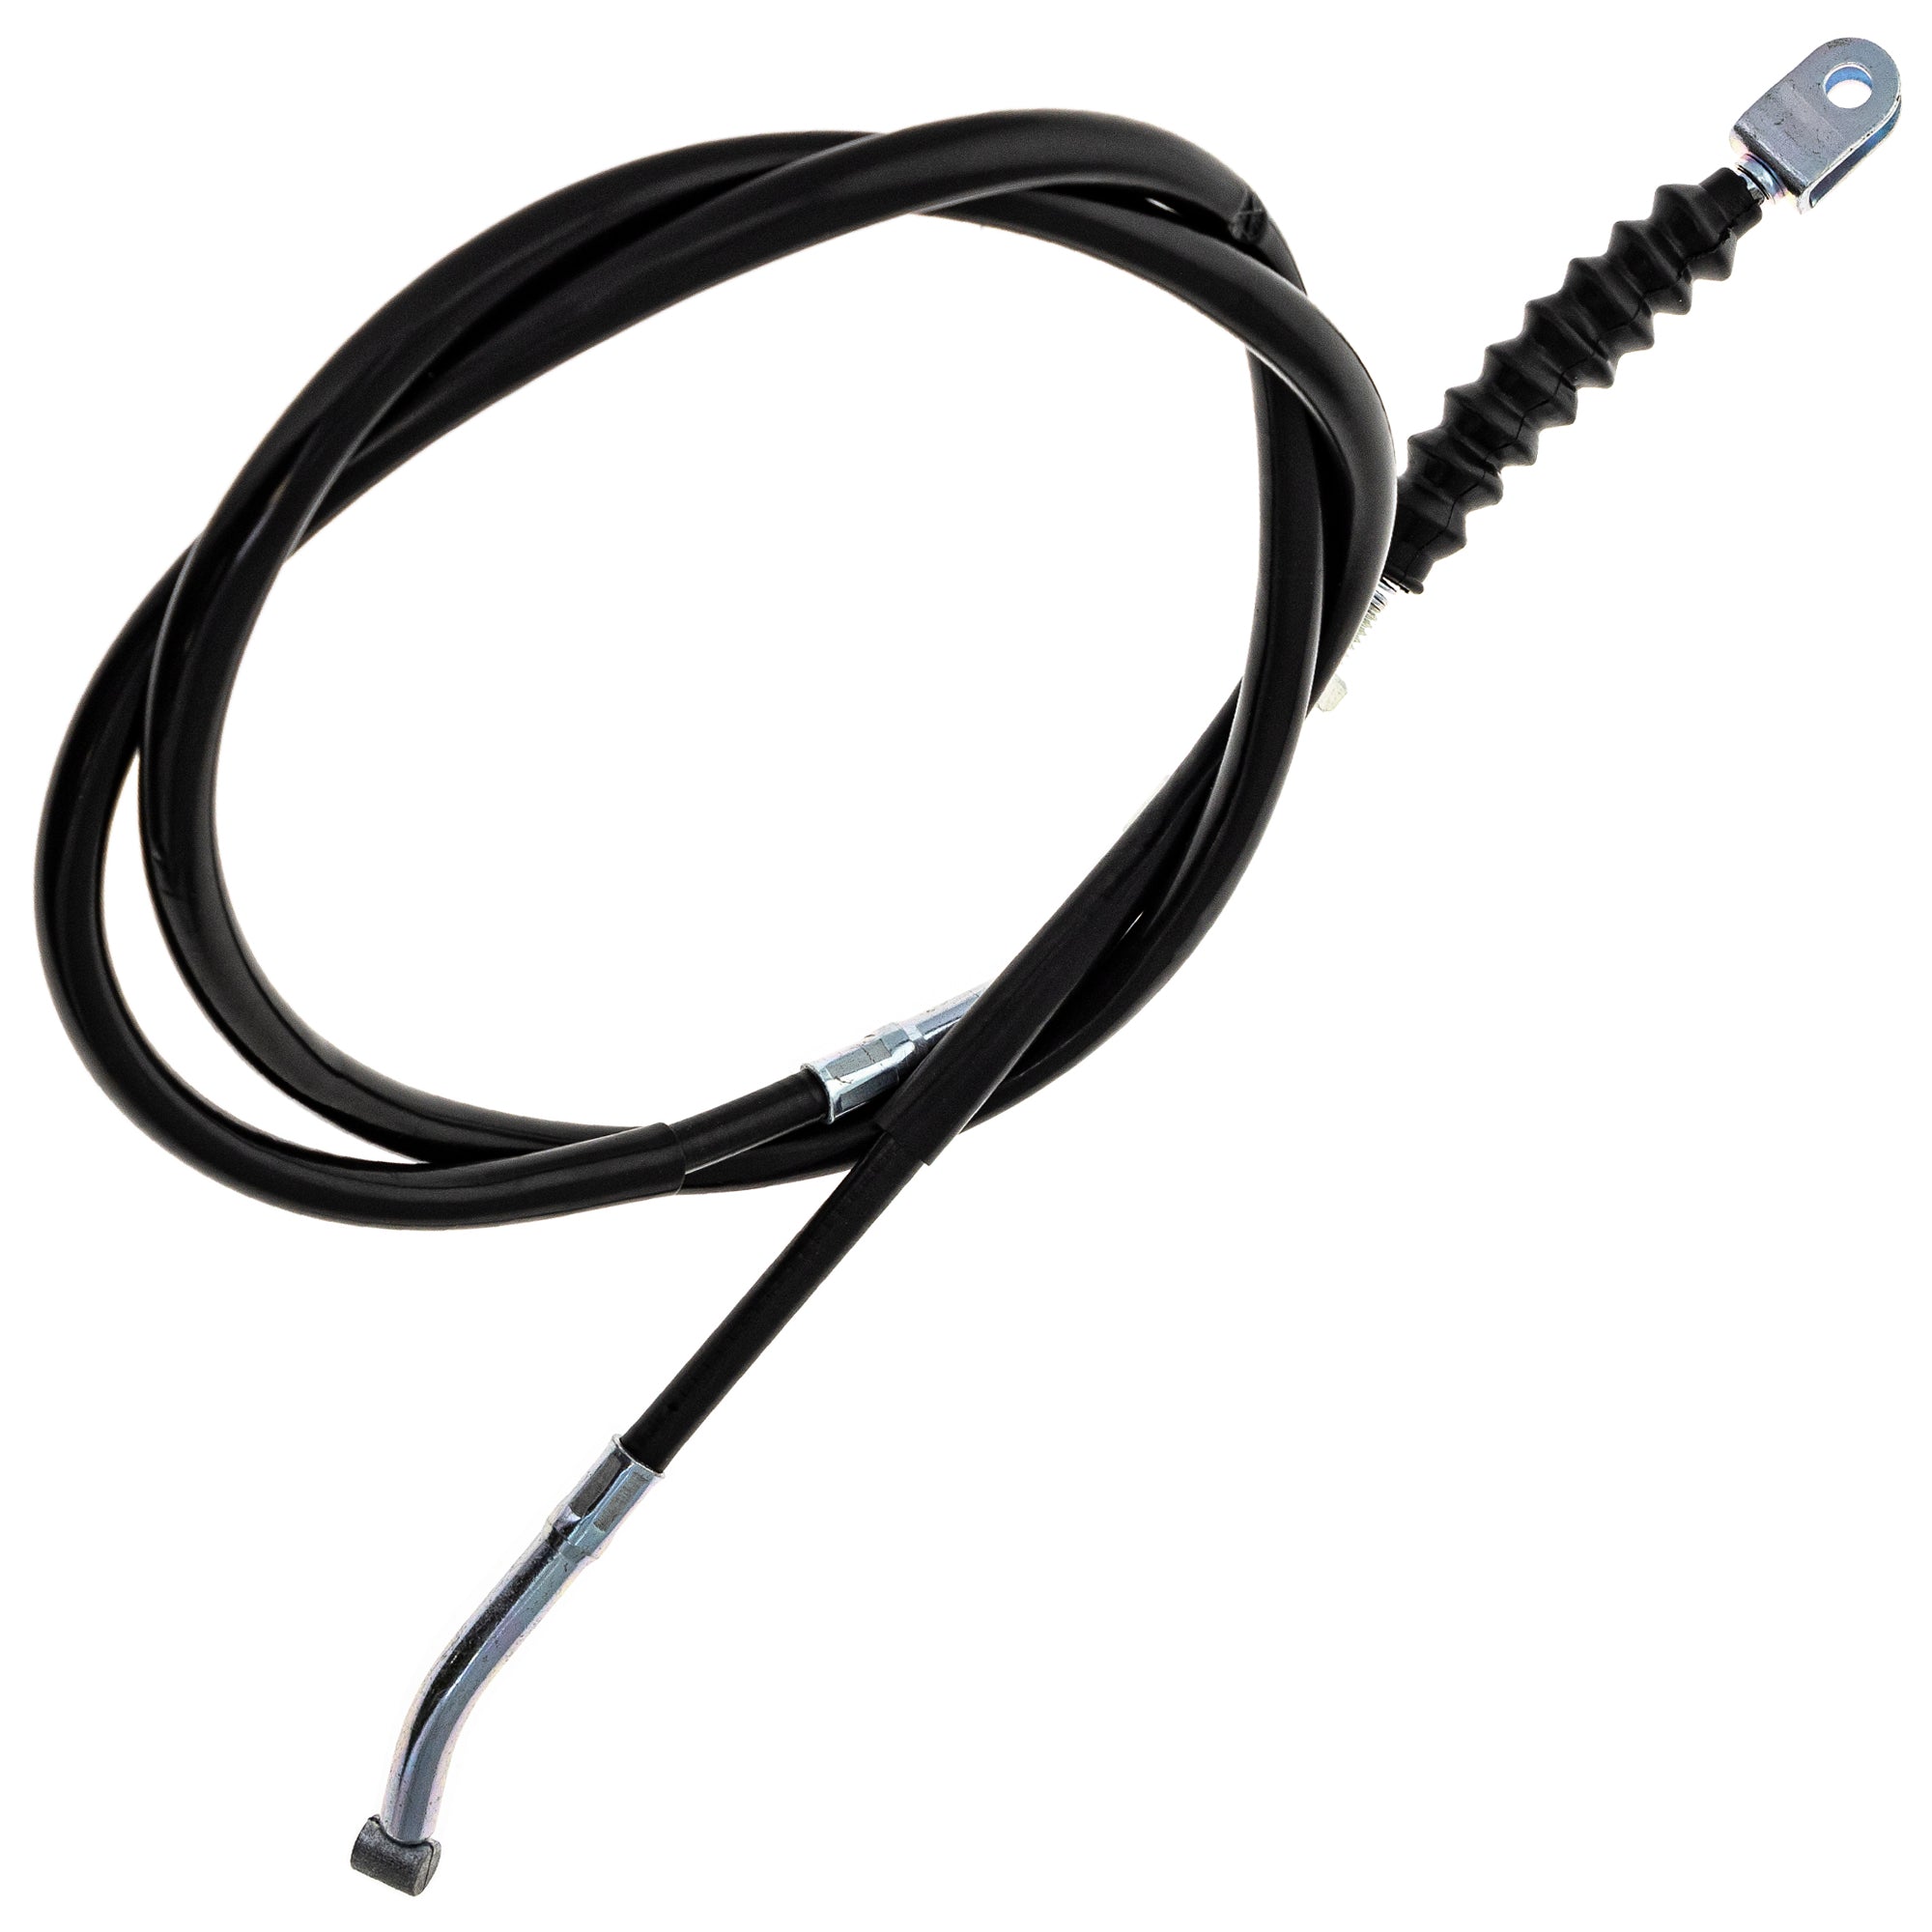 Clutch Cable for Suzuki GSXR750 49-State CA Motorcycle